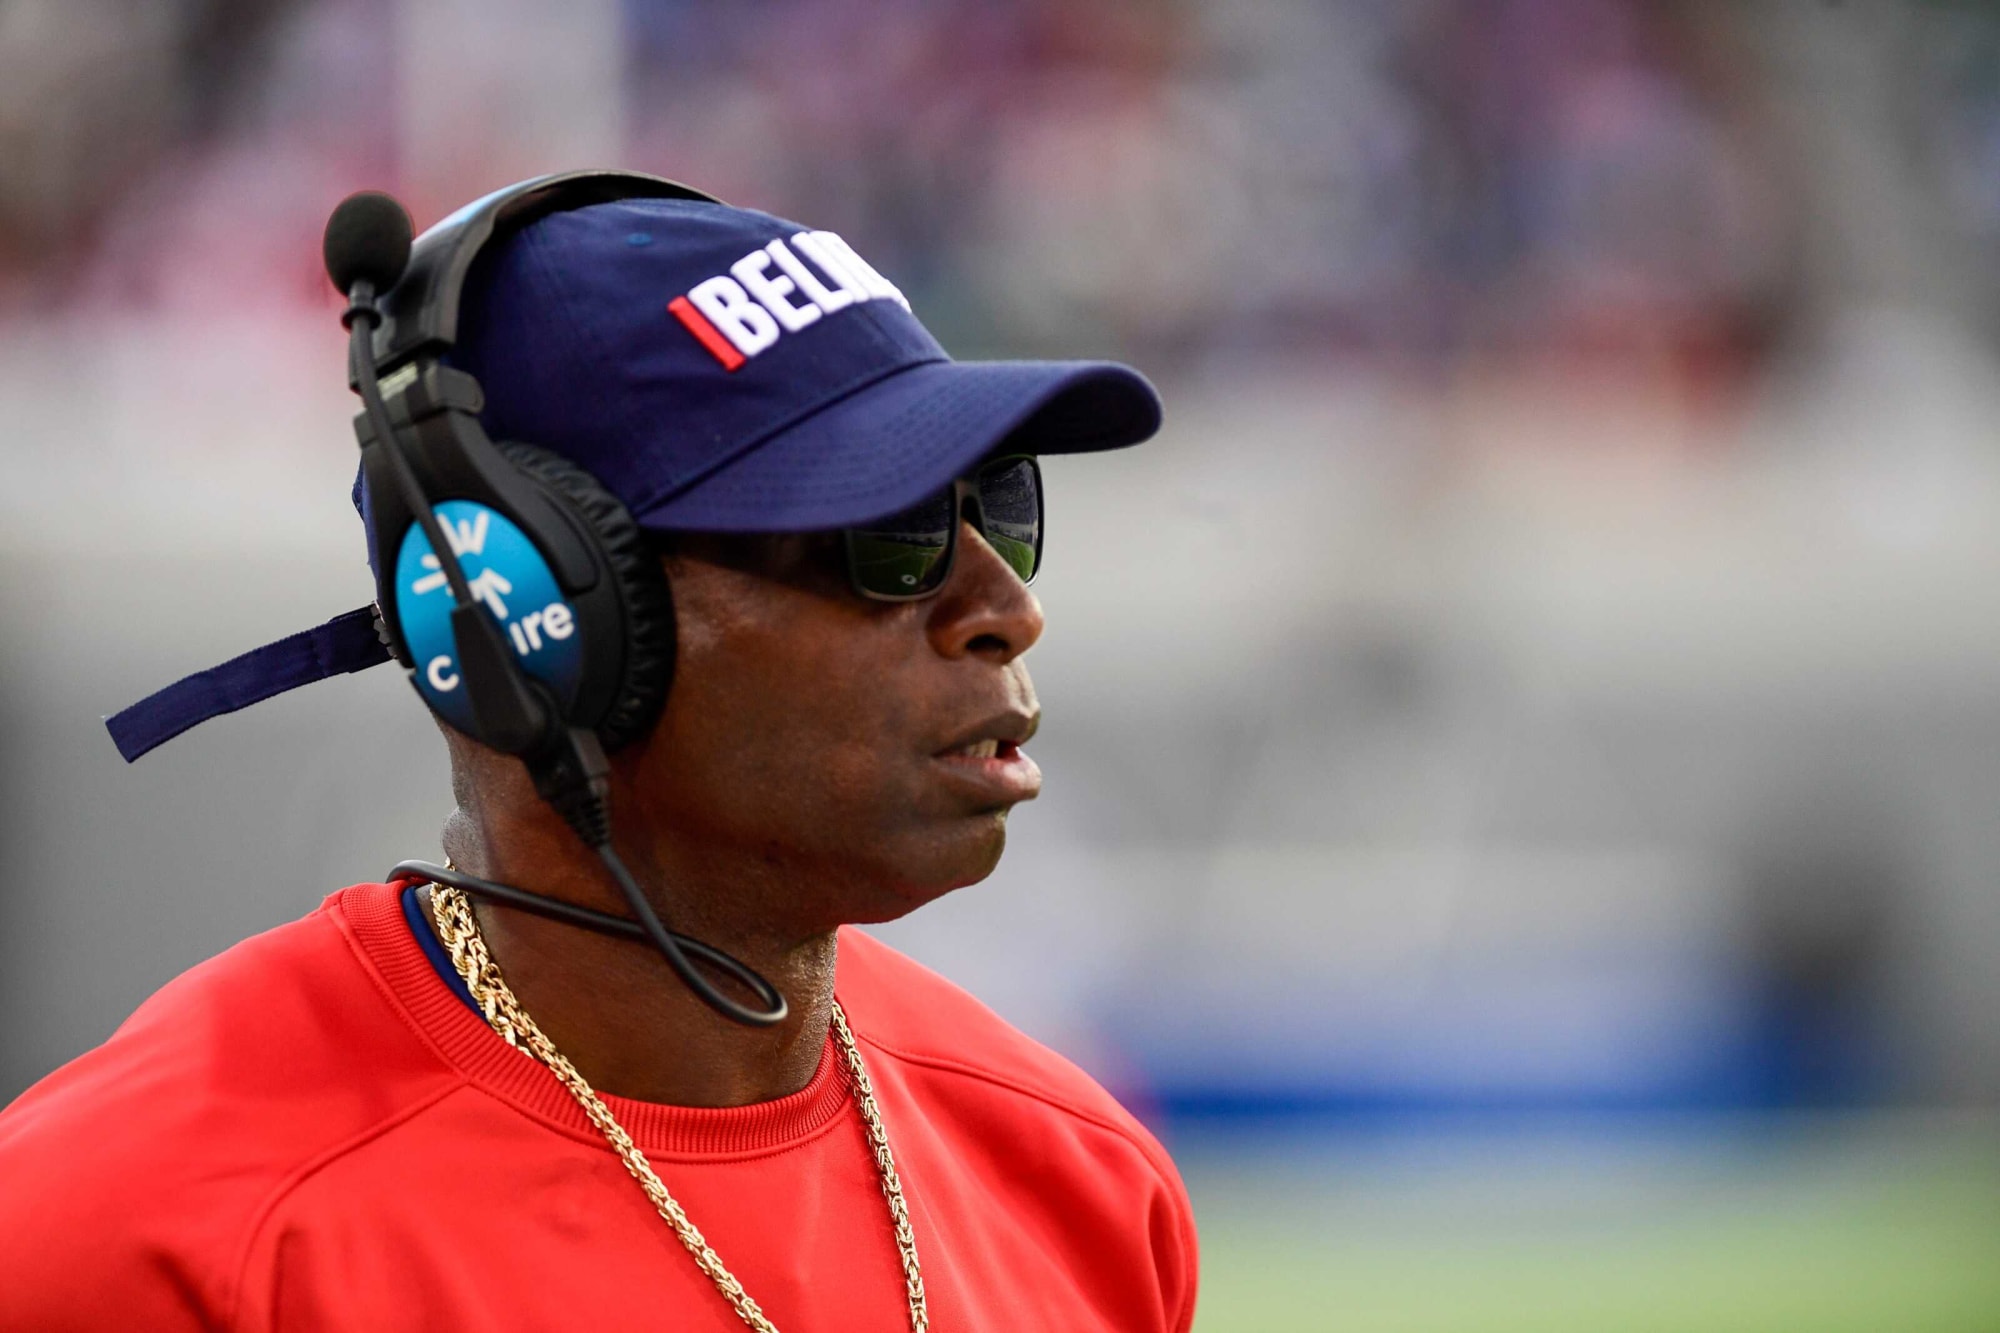 The Athletic on Deion Sanders: “The best fit would be Auburn football”